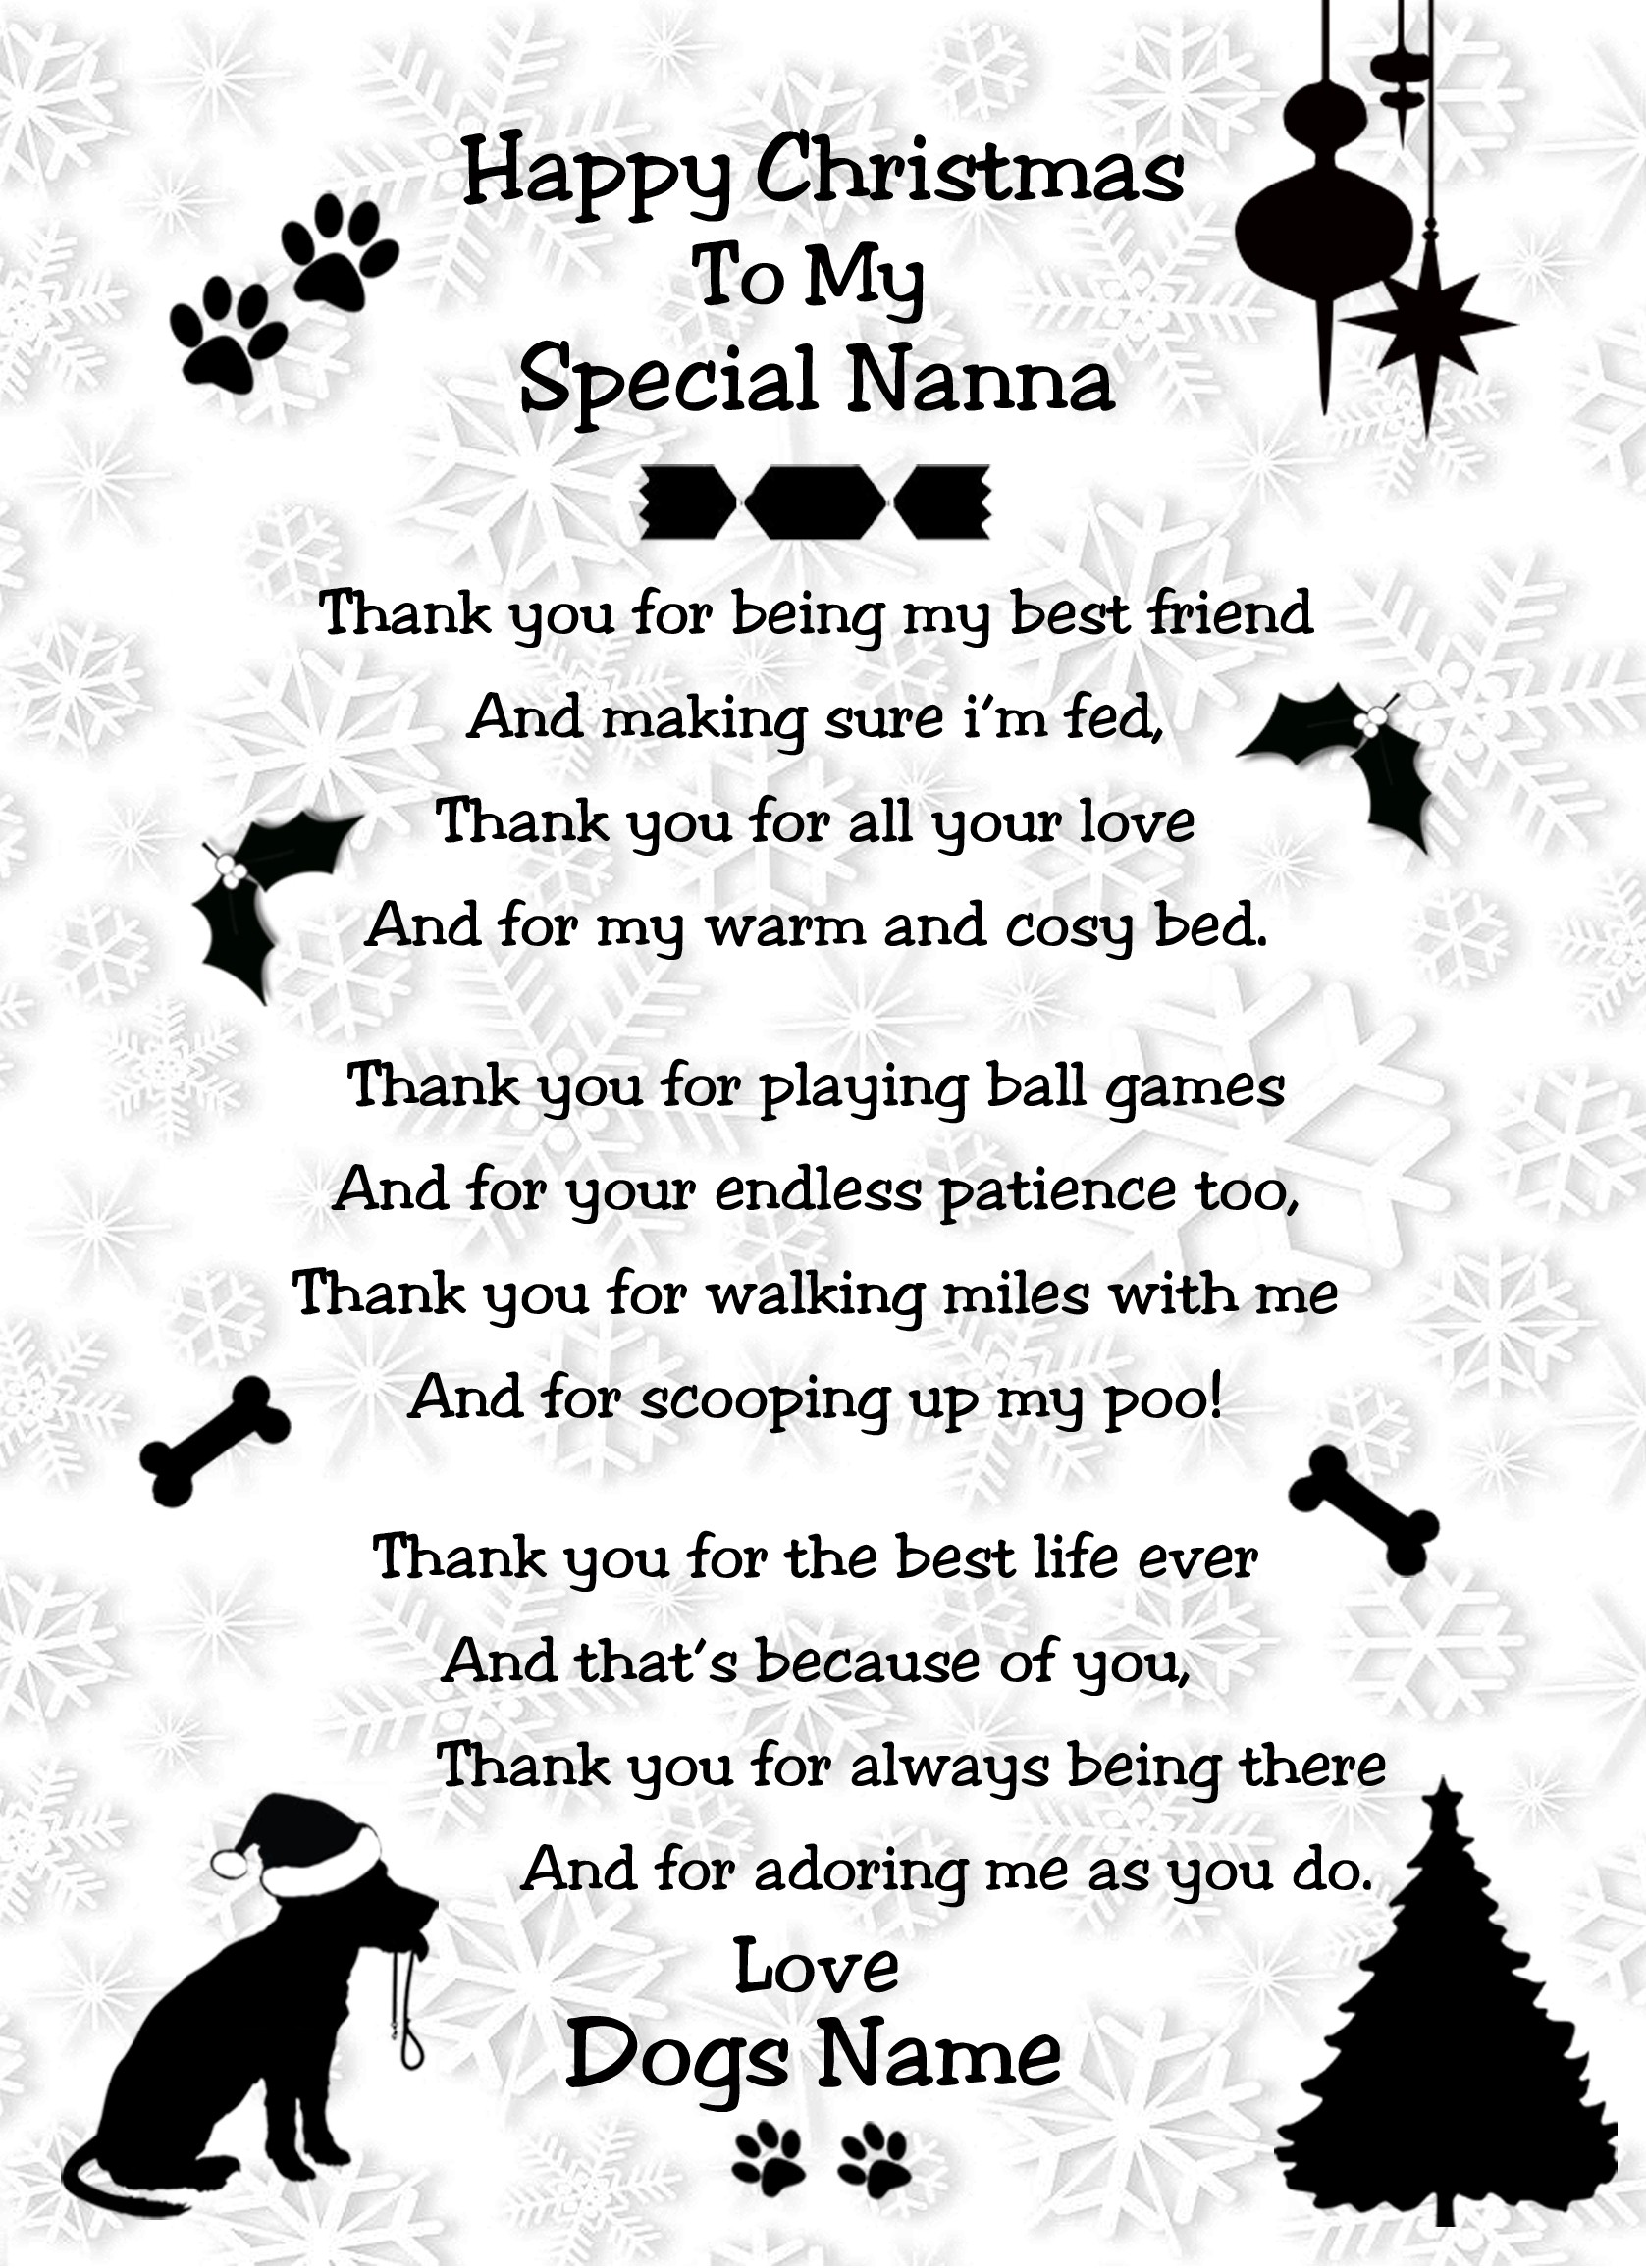 Personalised From The Dog Verse Poem Christmas Card (Special Nanna, White, Happy Christmas)